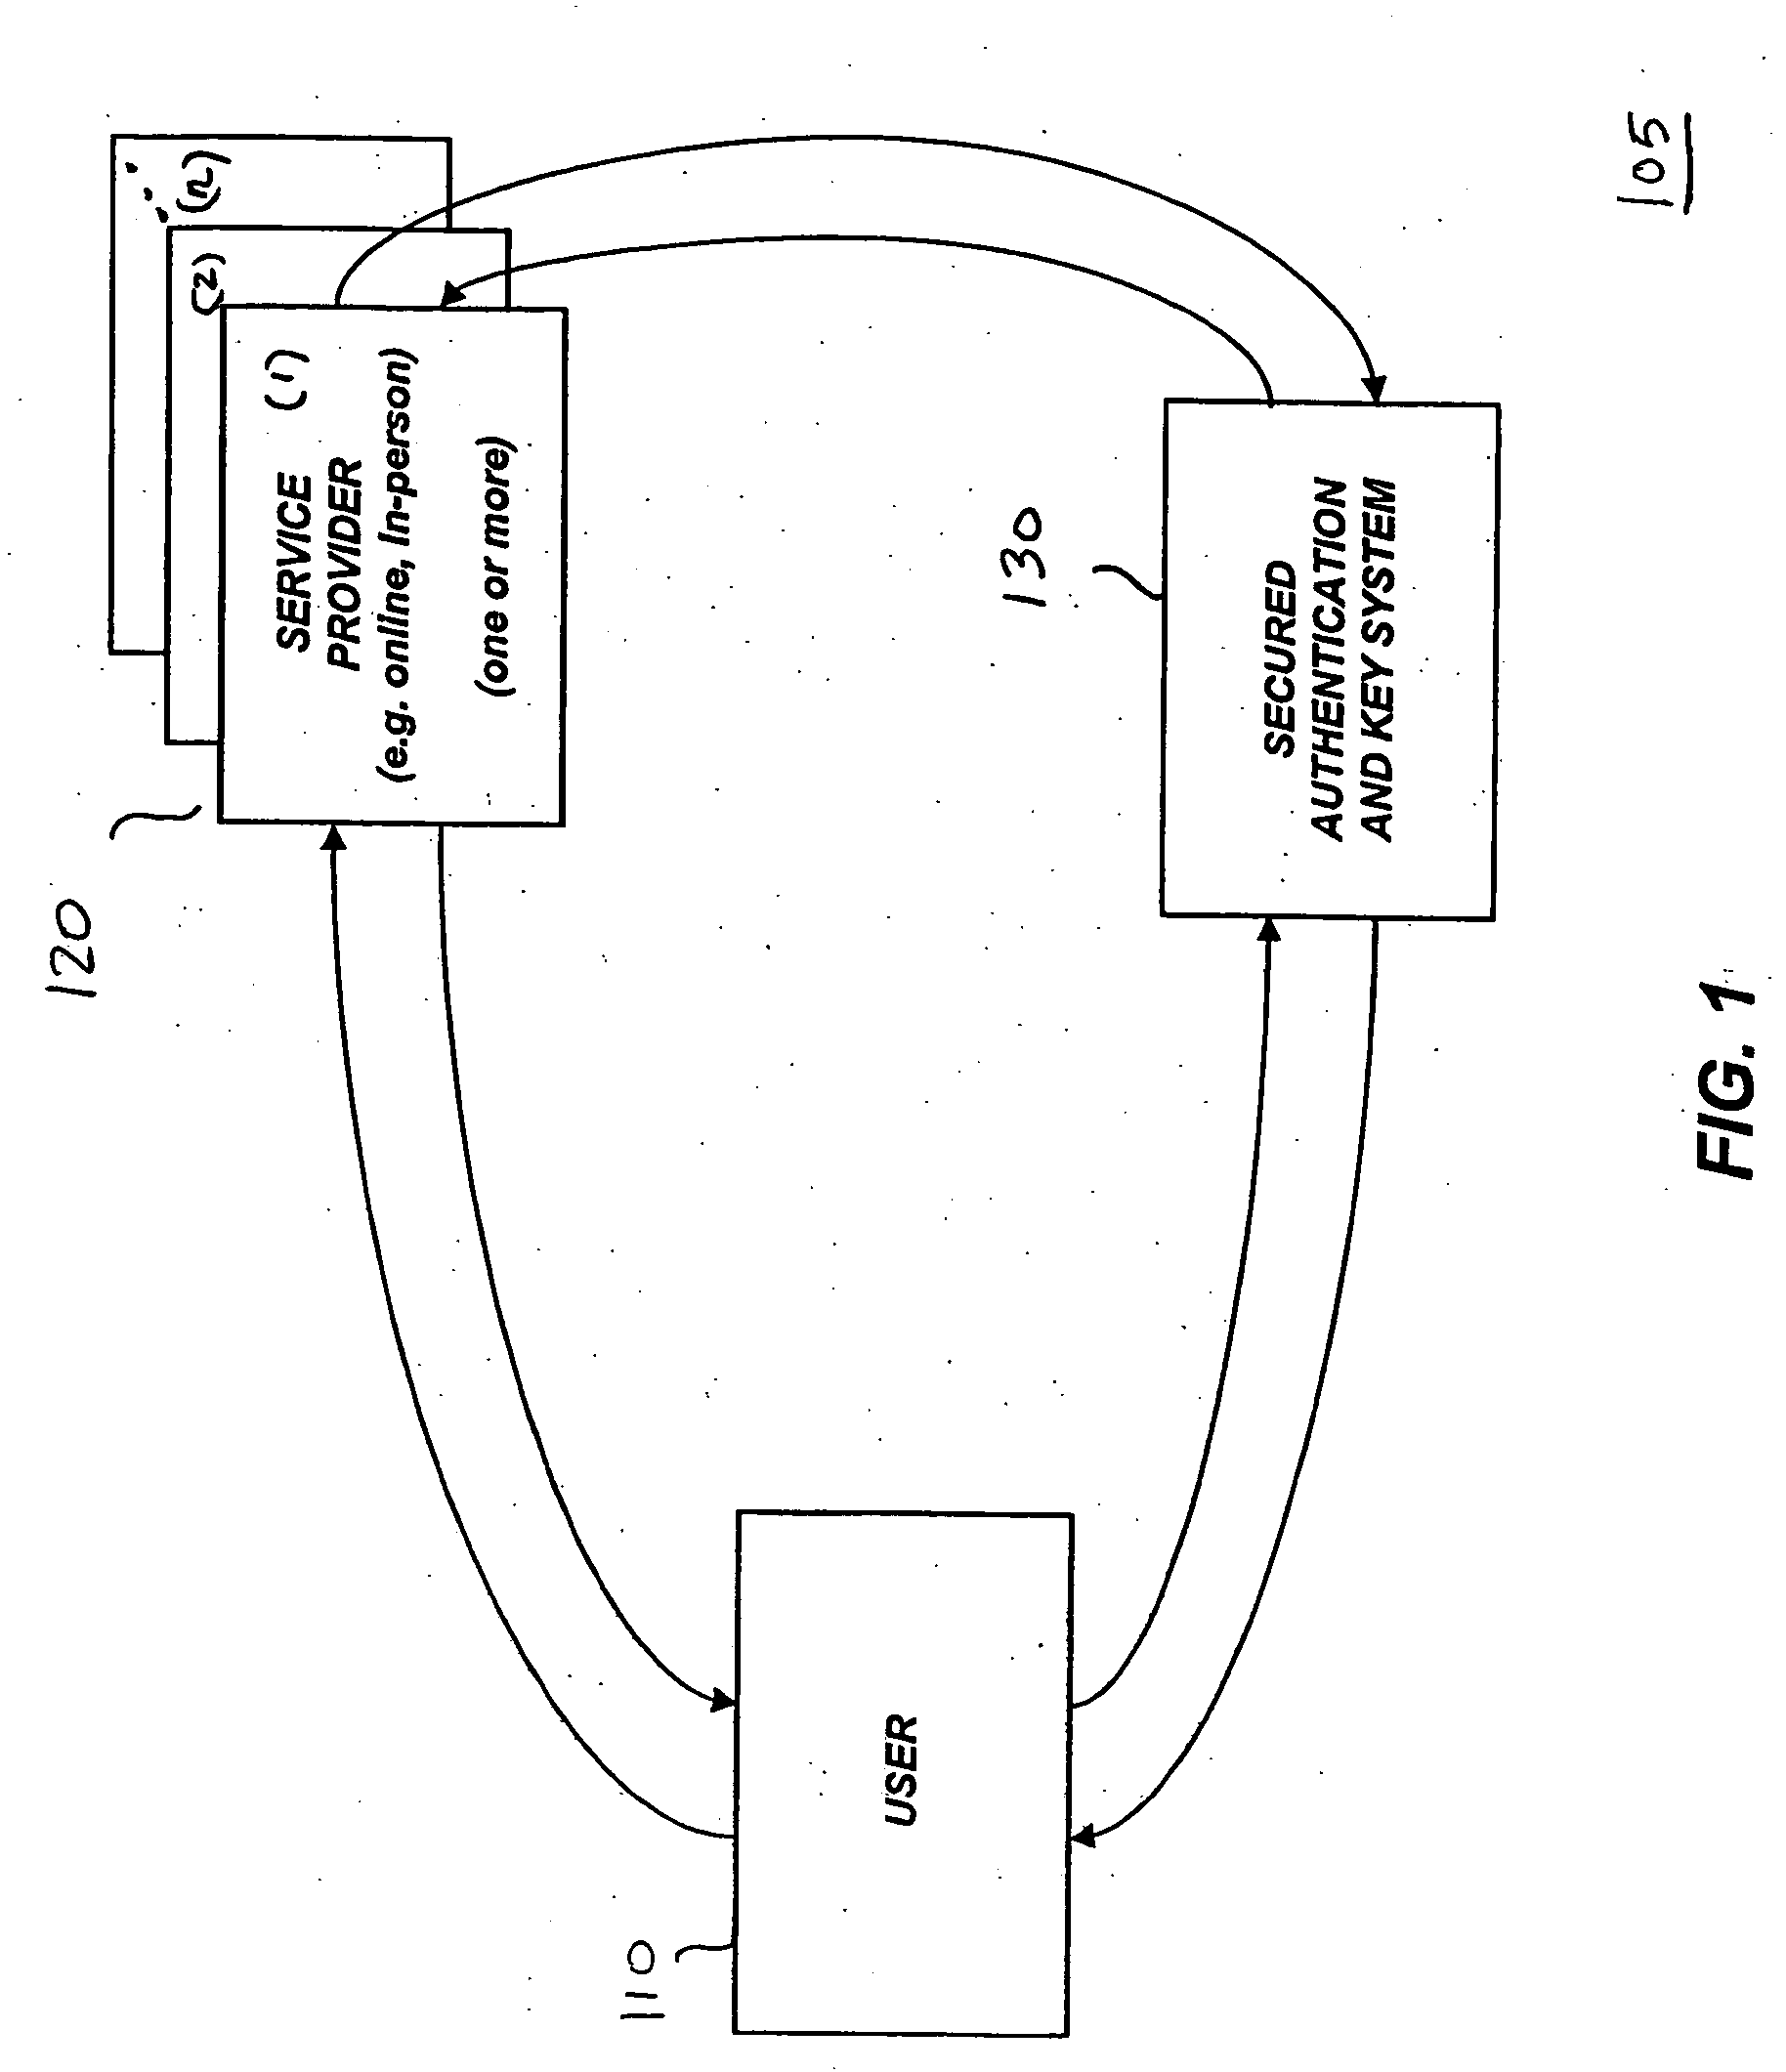 Single one-time password token with single PIN for access to multiple providers